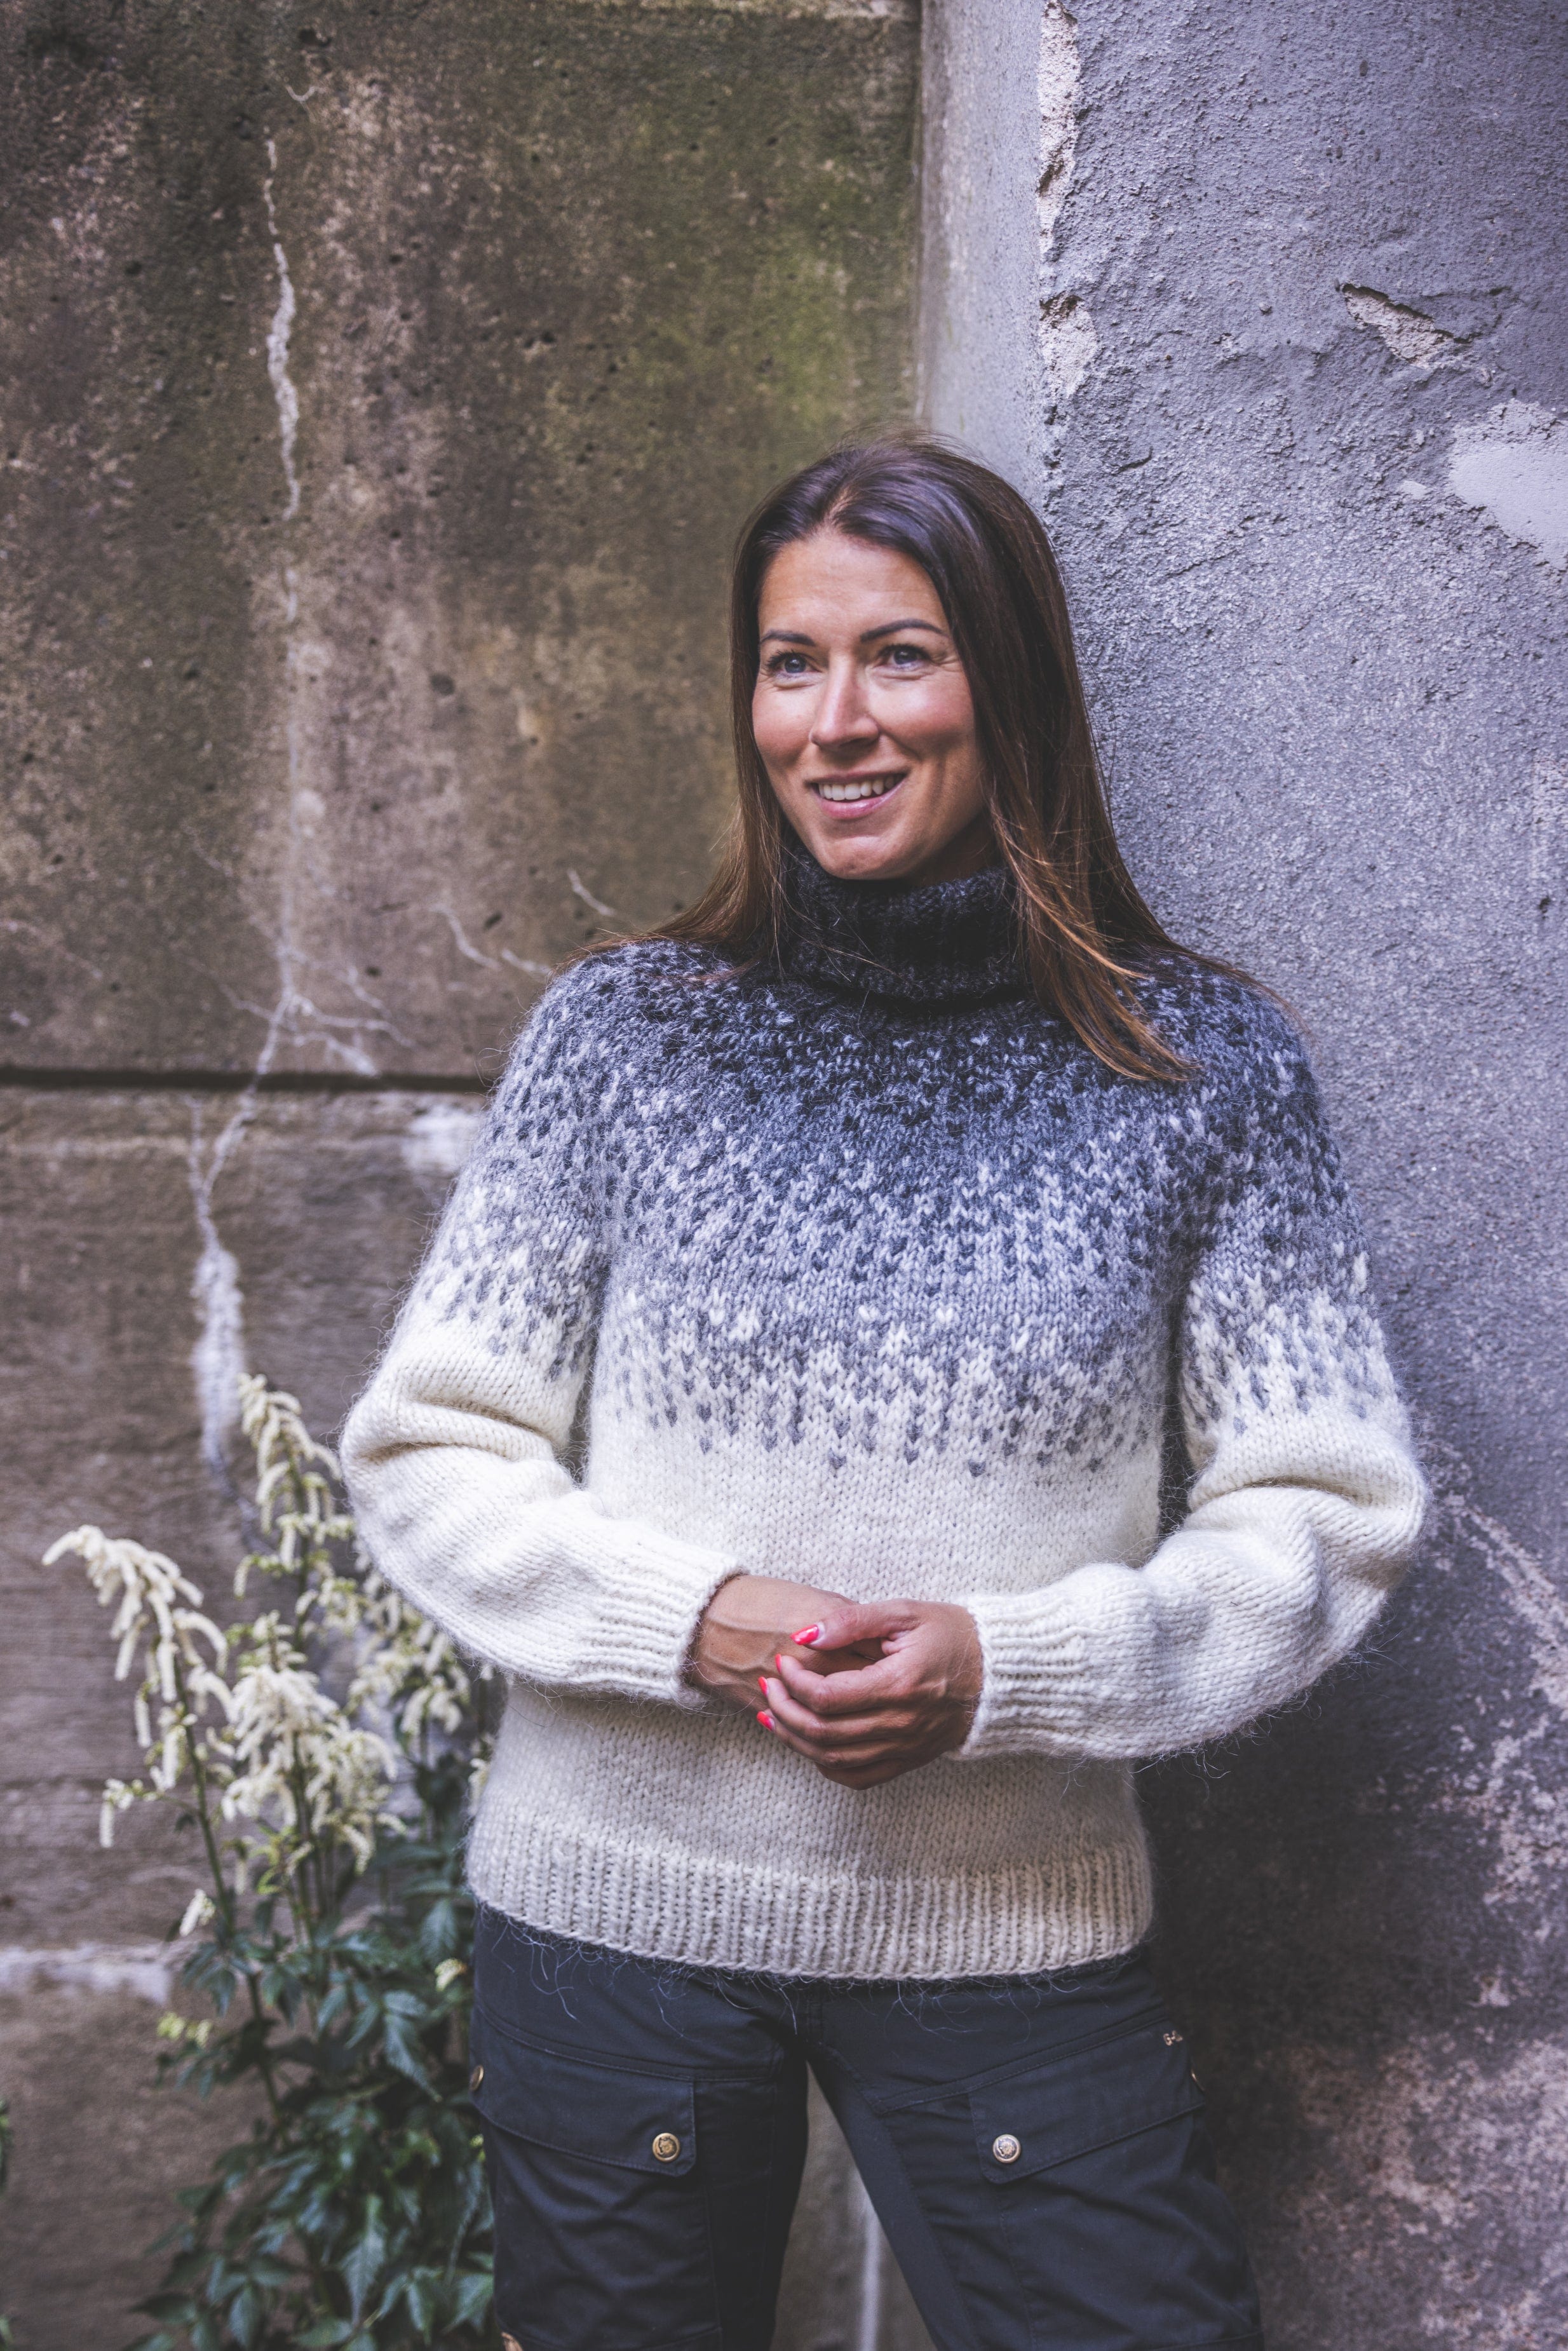 Sumuneule White and Grey - Wool sweater knitting kit - The Icelandic Store